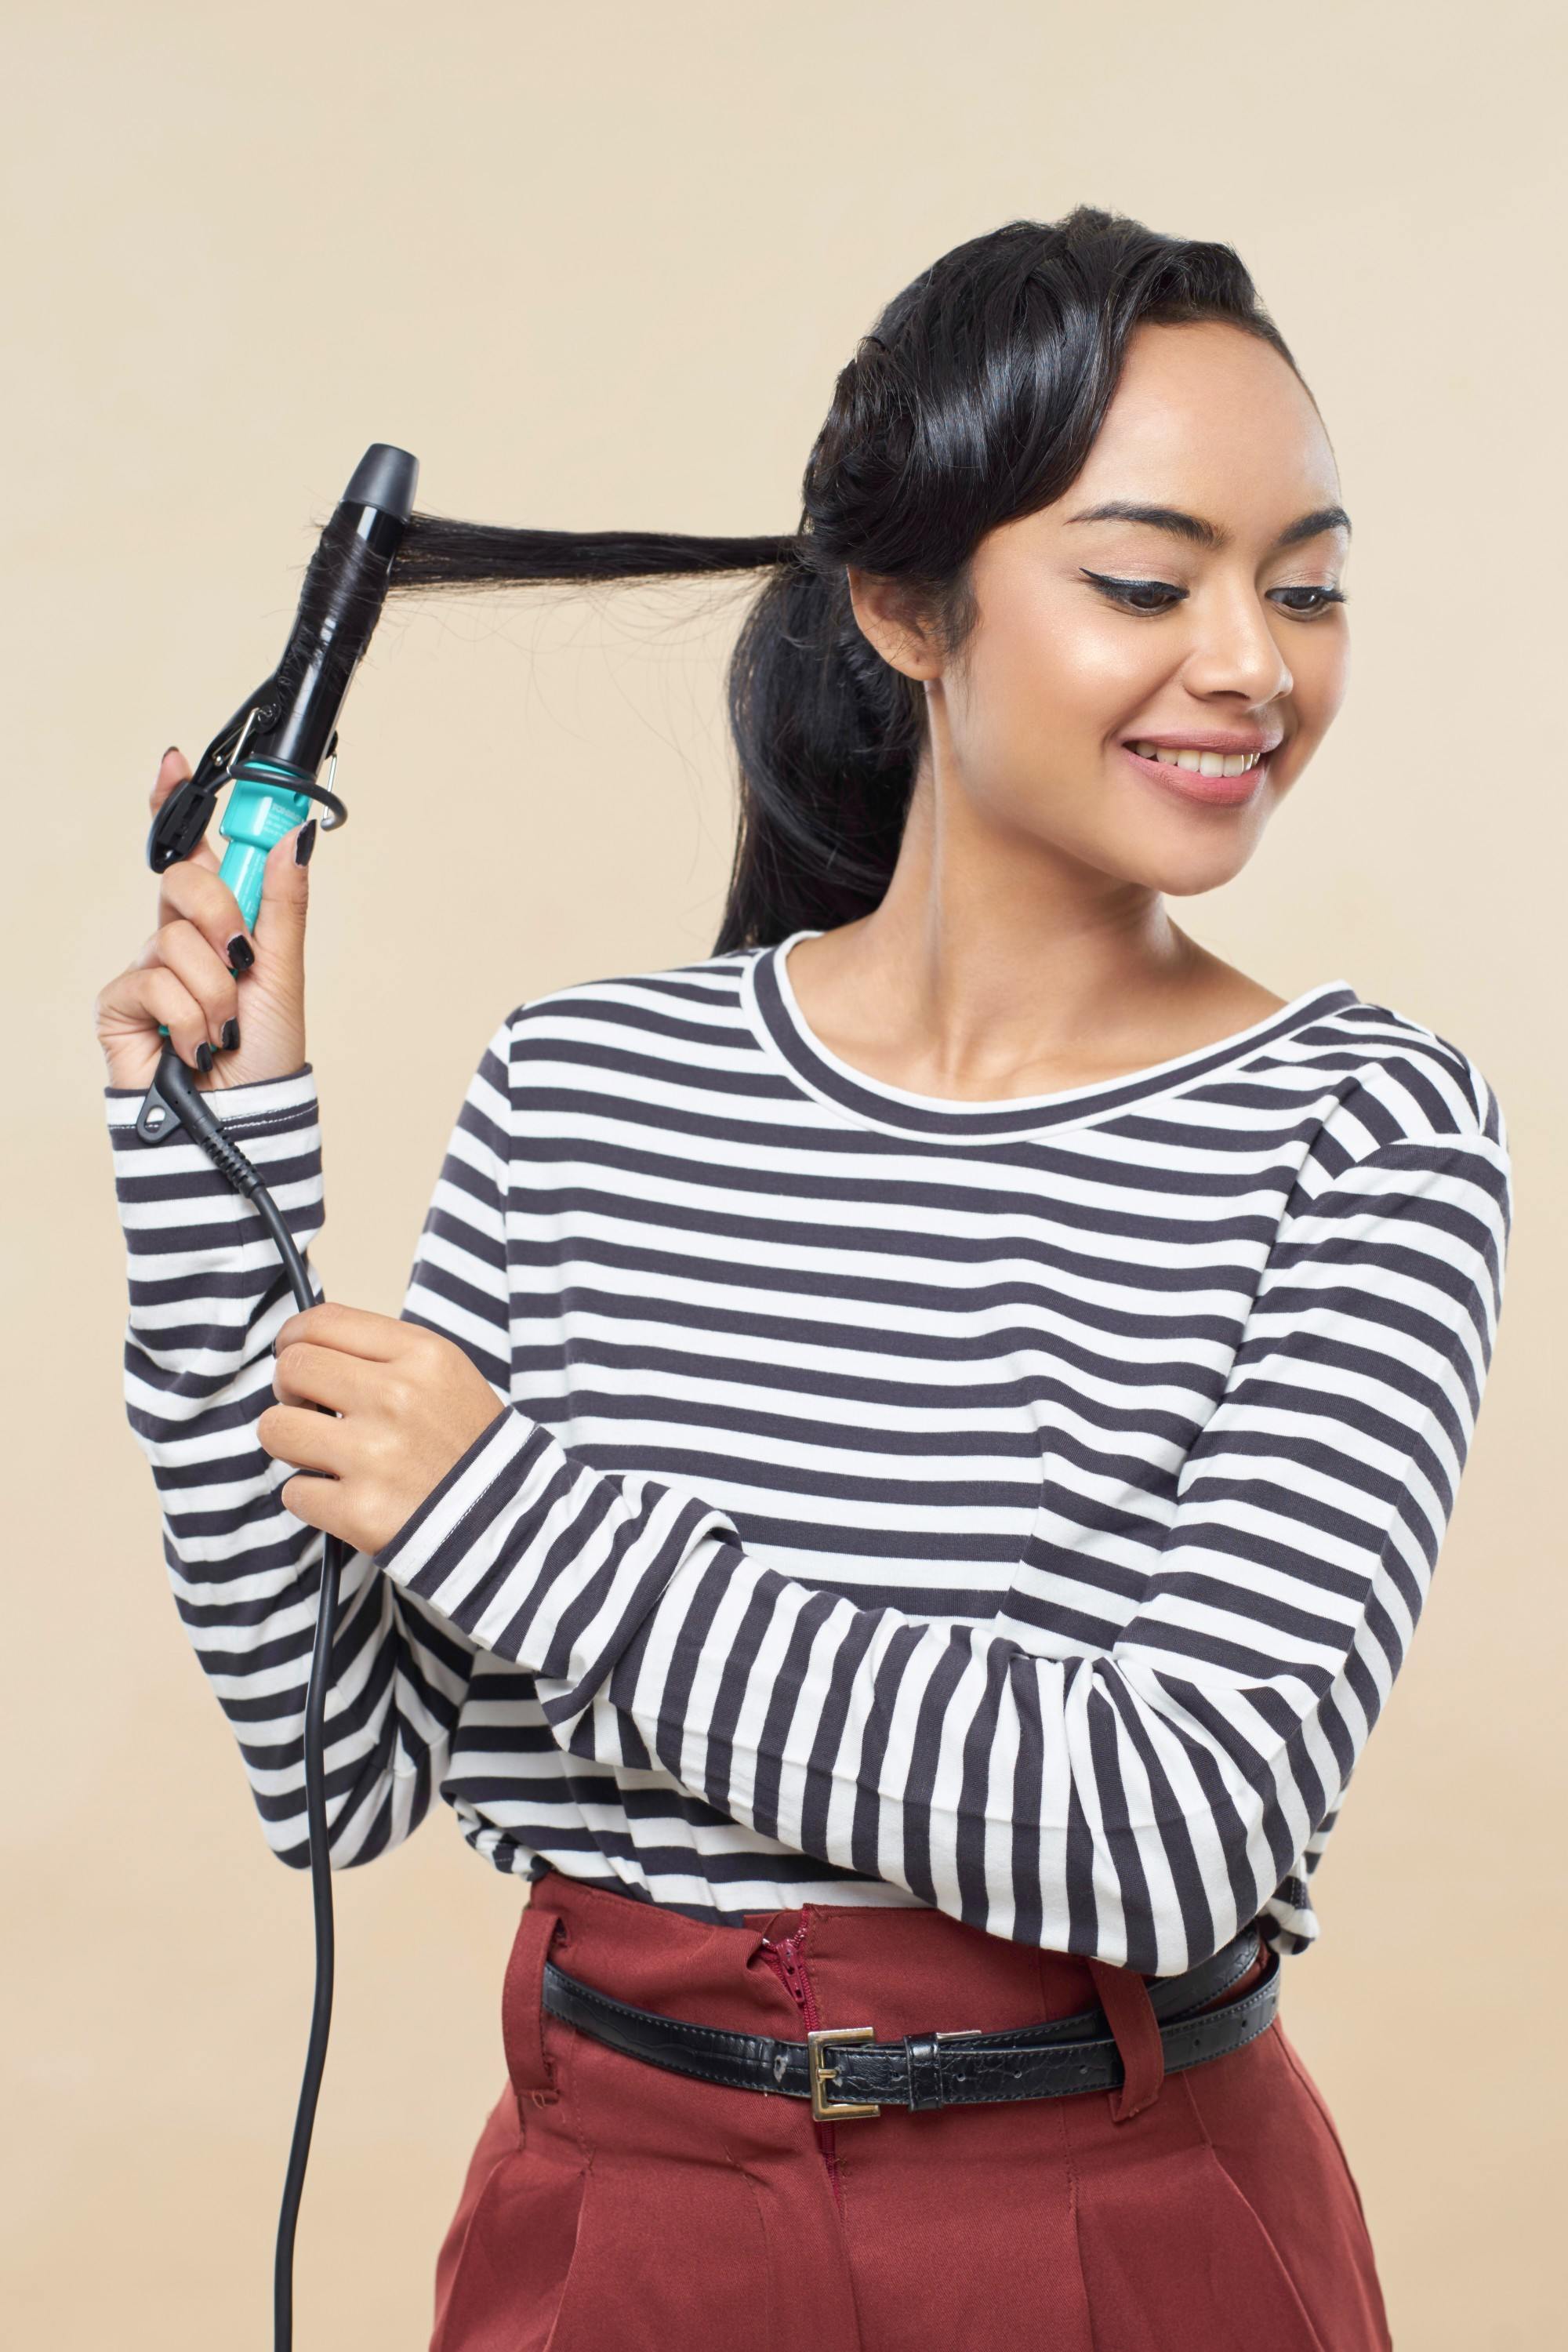 hair fall: Girl is curling her hair with a curling wand